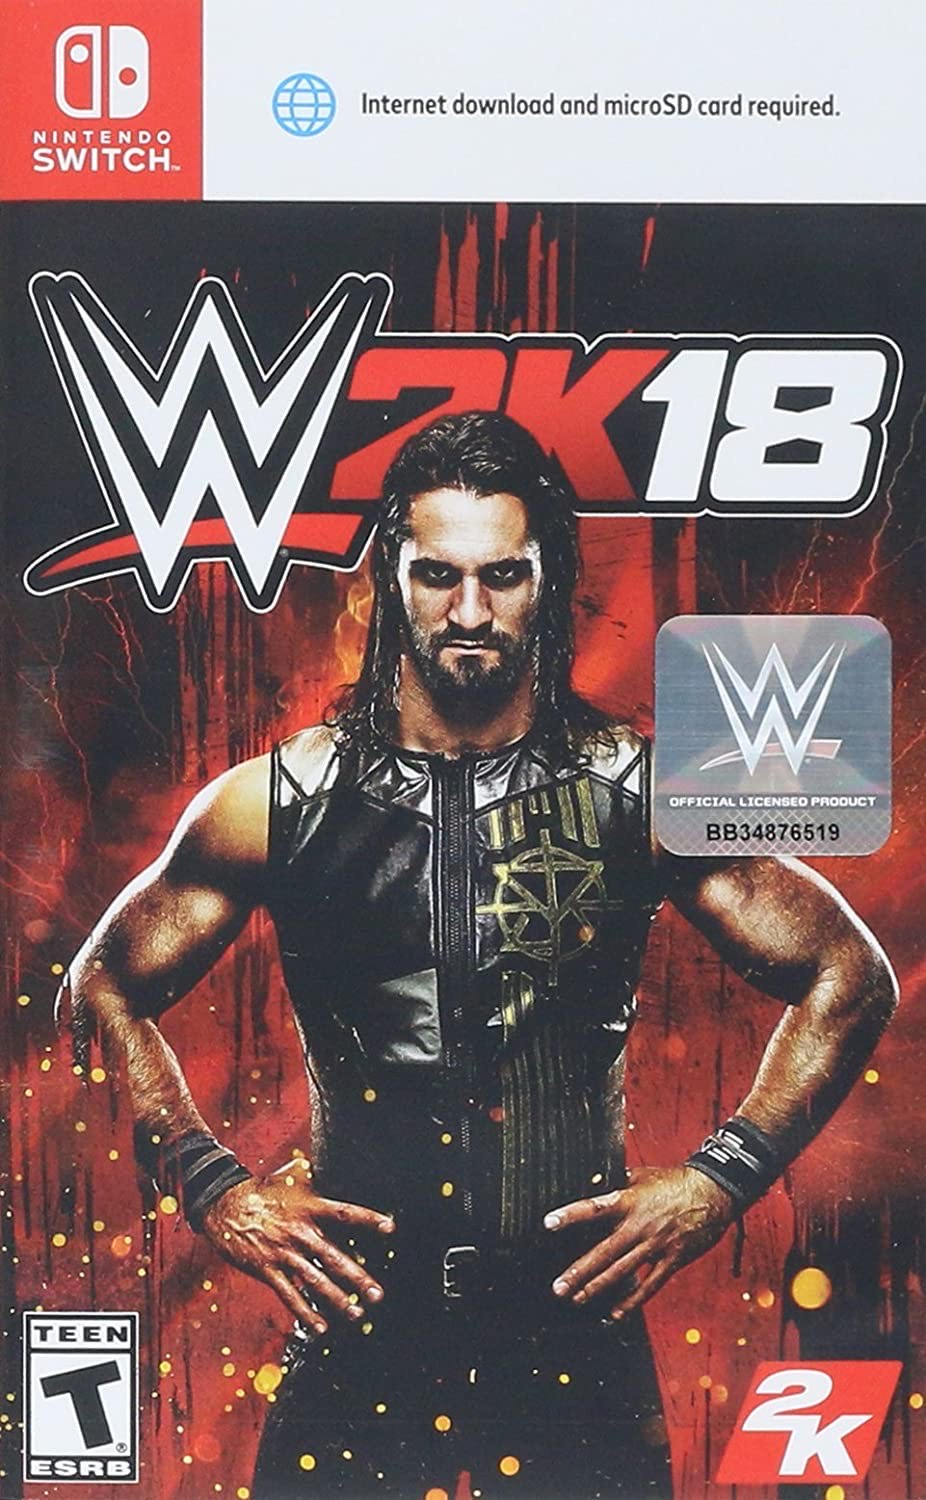 download wwe 2k18 on nintendo switch for free